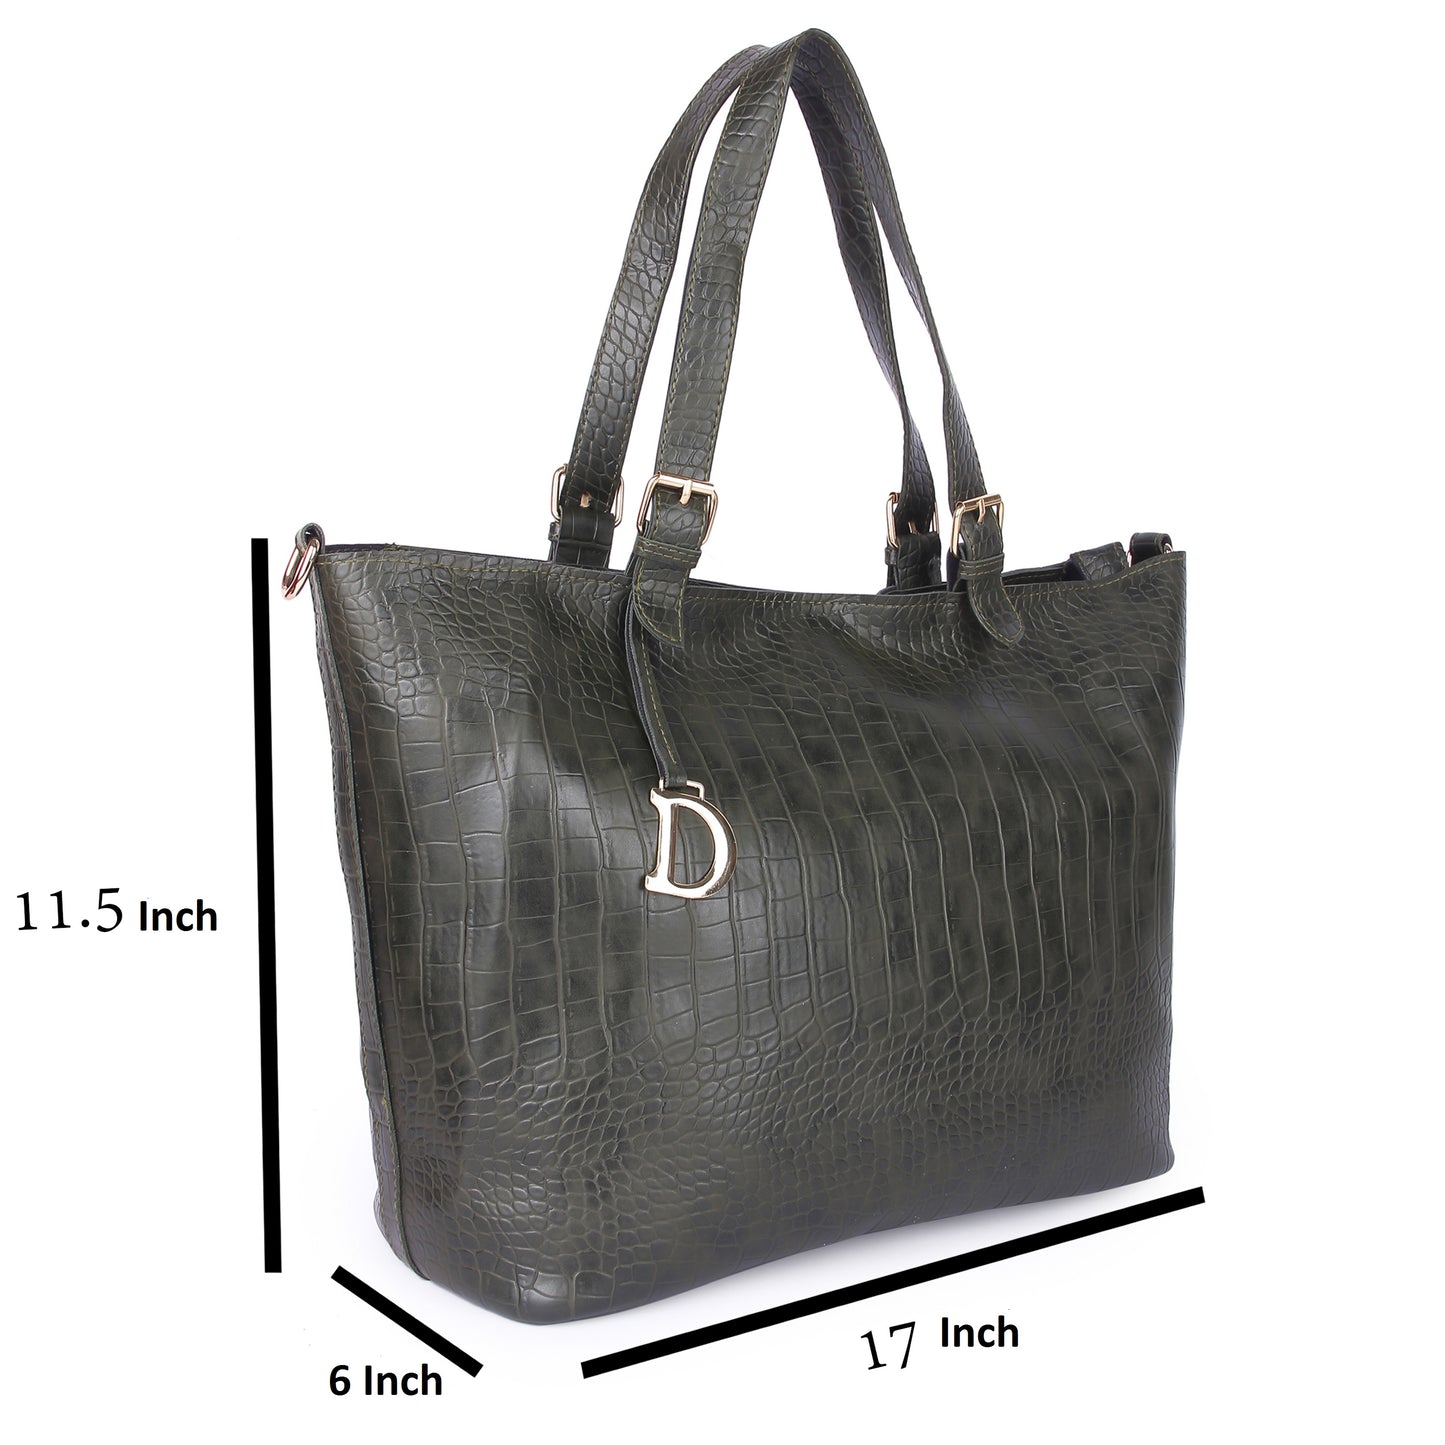 Tote Bags For Girls In PU Leather